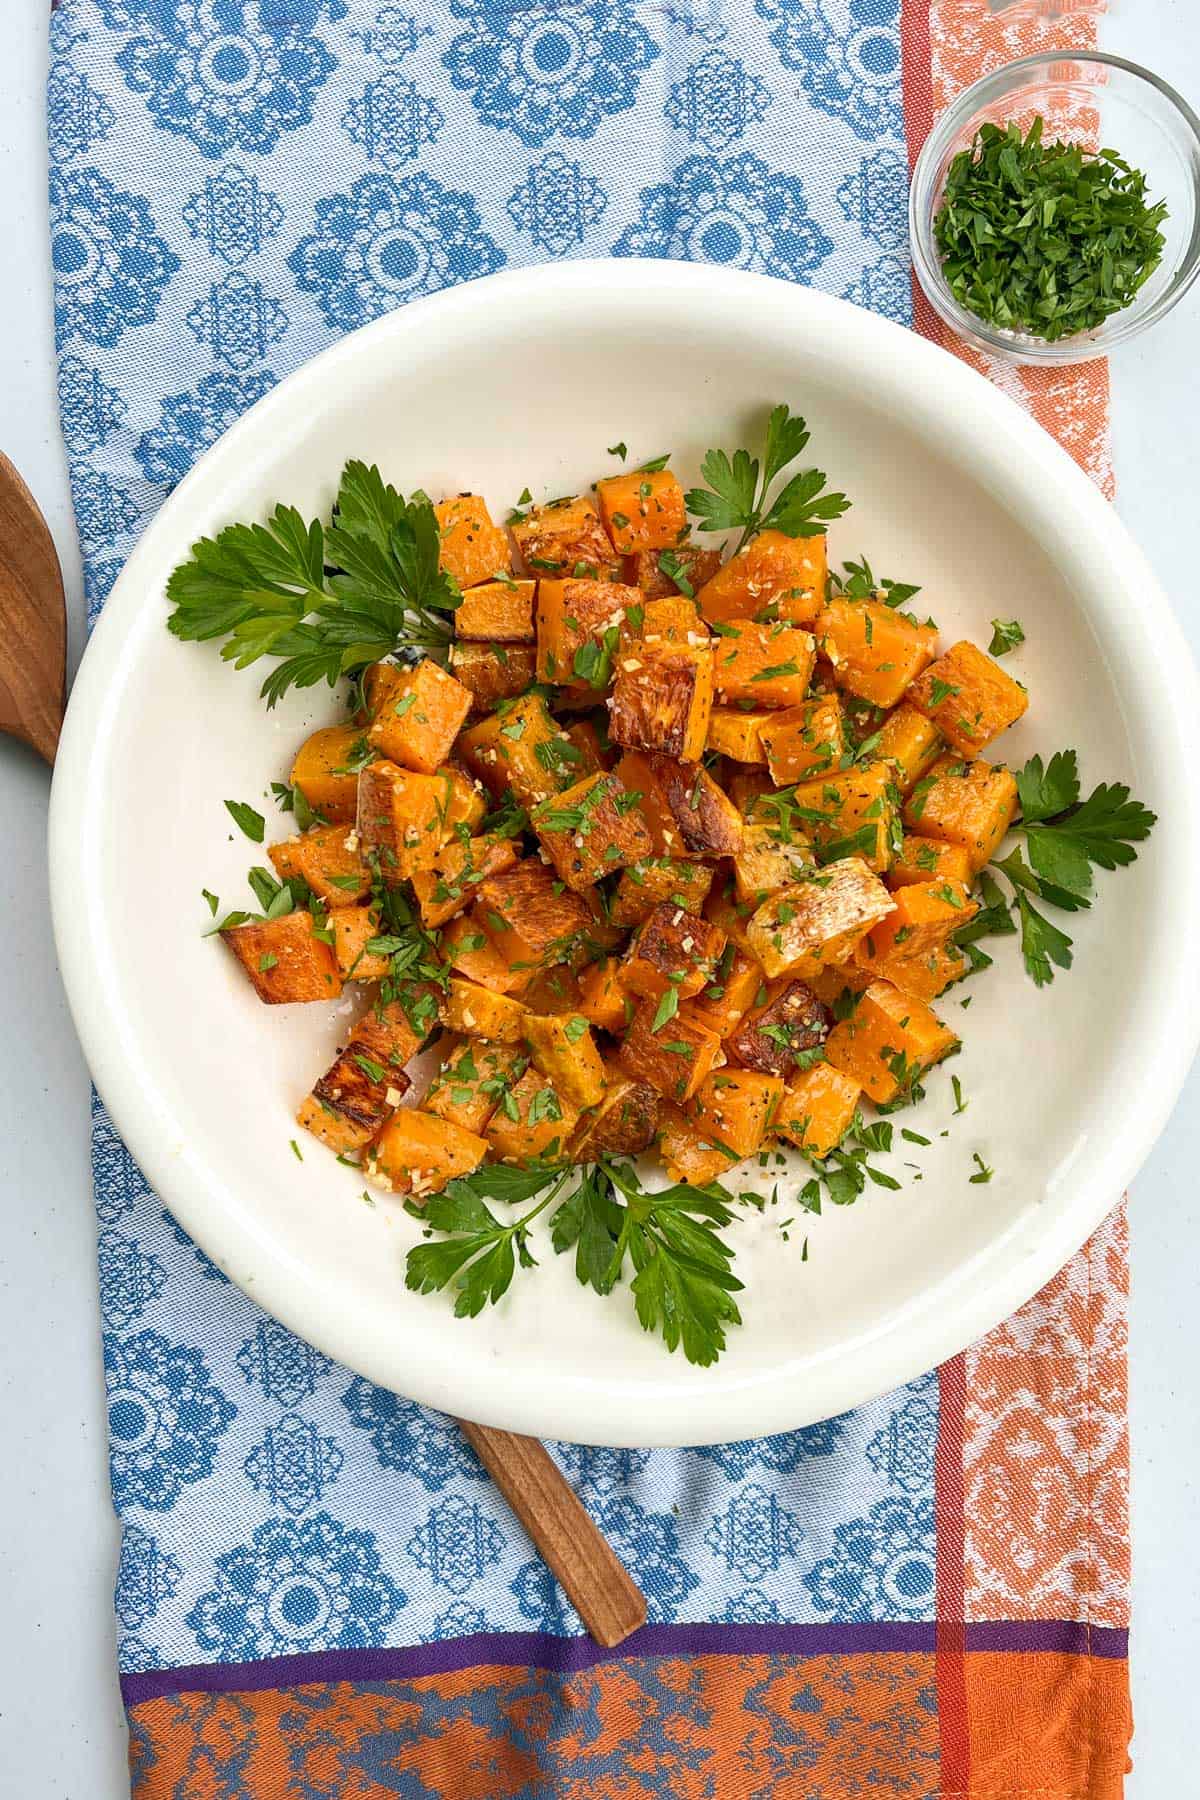 cubes of roasted butternut squash in a white bowl, decorated with sprigs of parsley